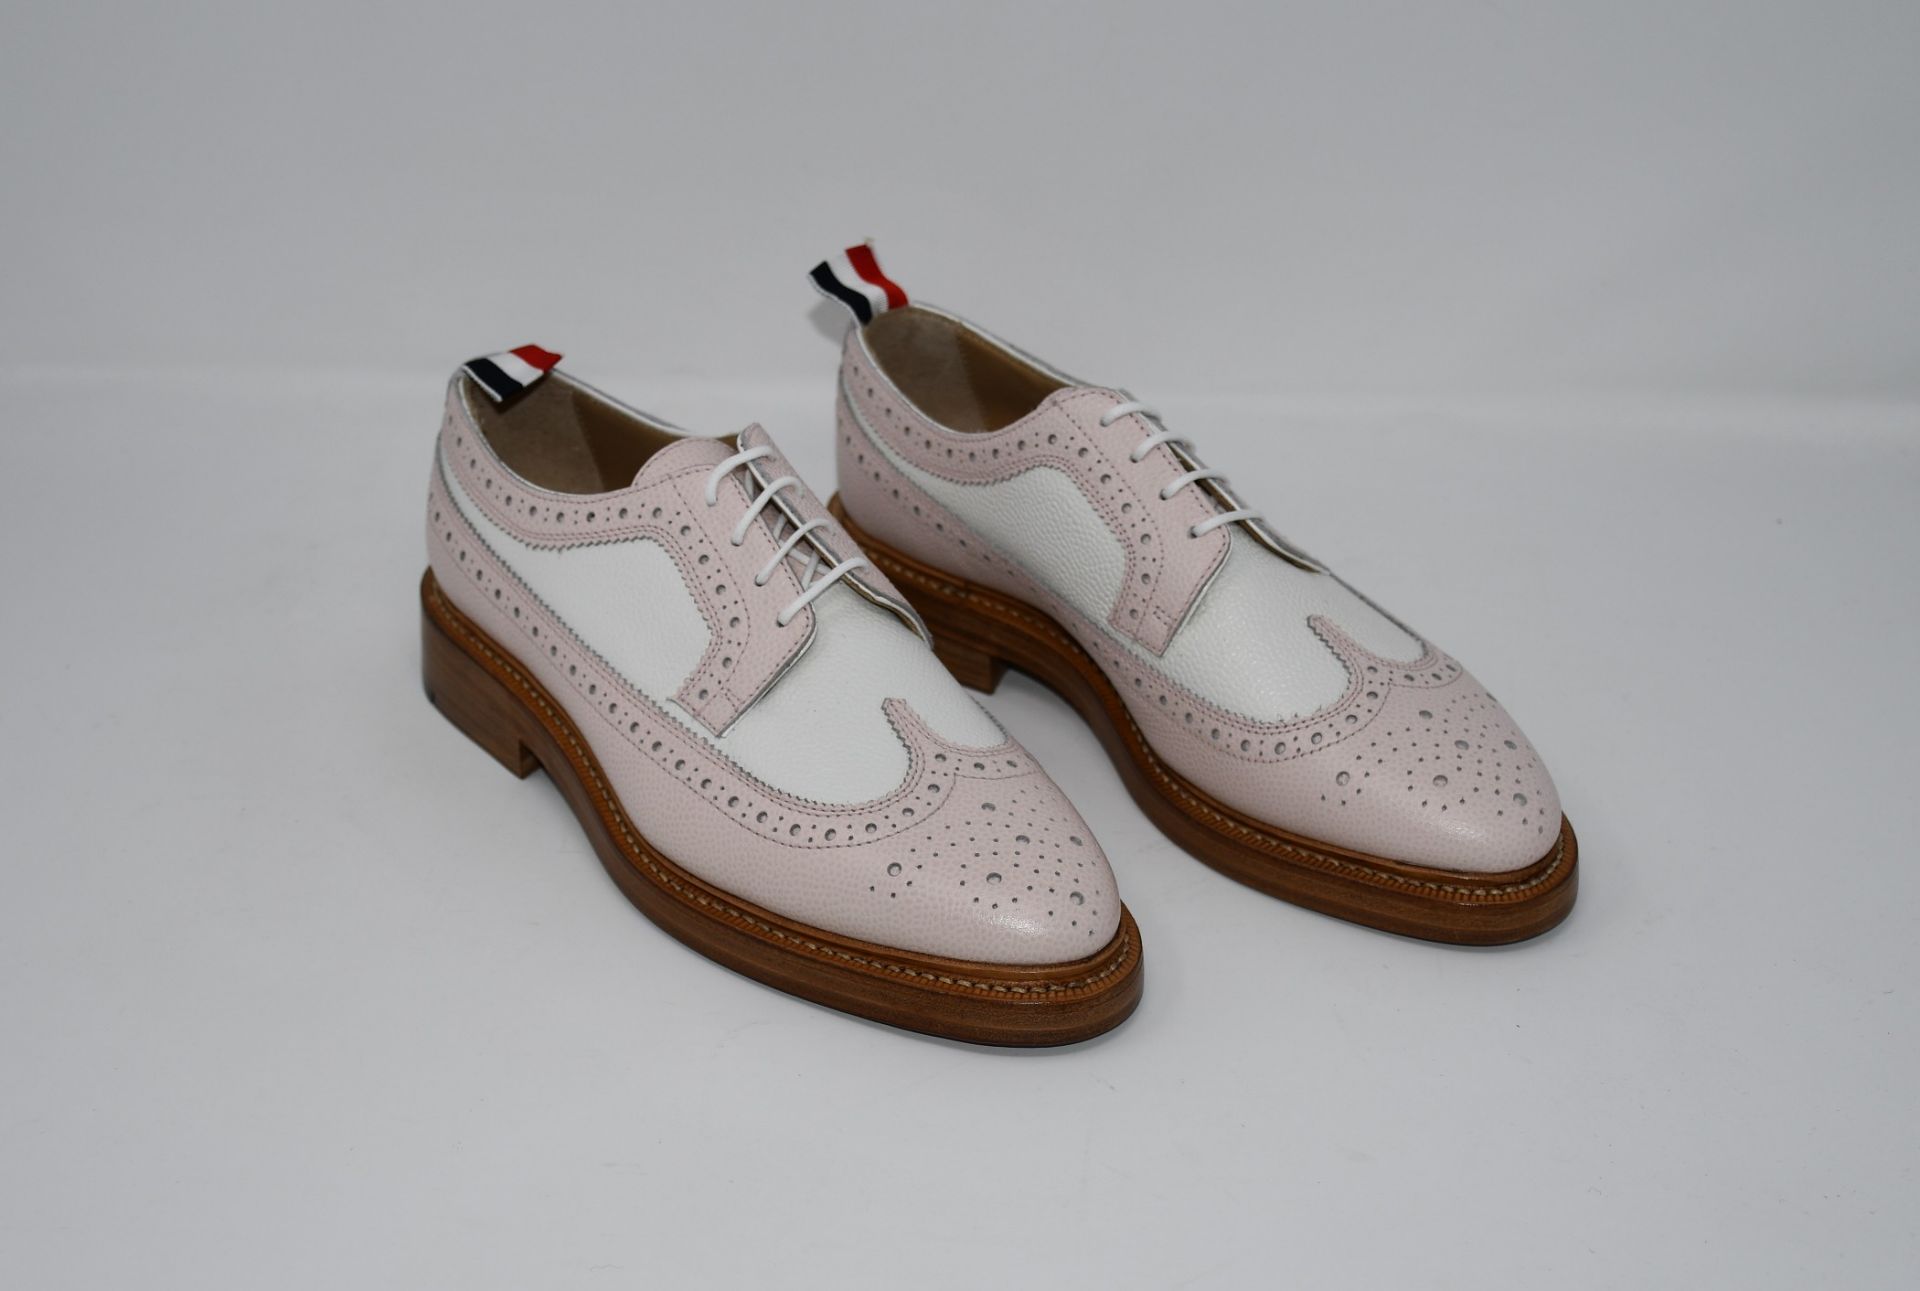 One as new Thom Browne Longwing Spectator Brogue shoes in light pink (EU size 38).